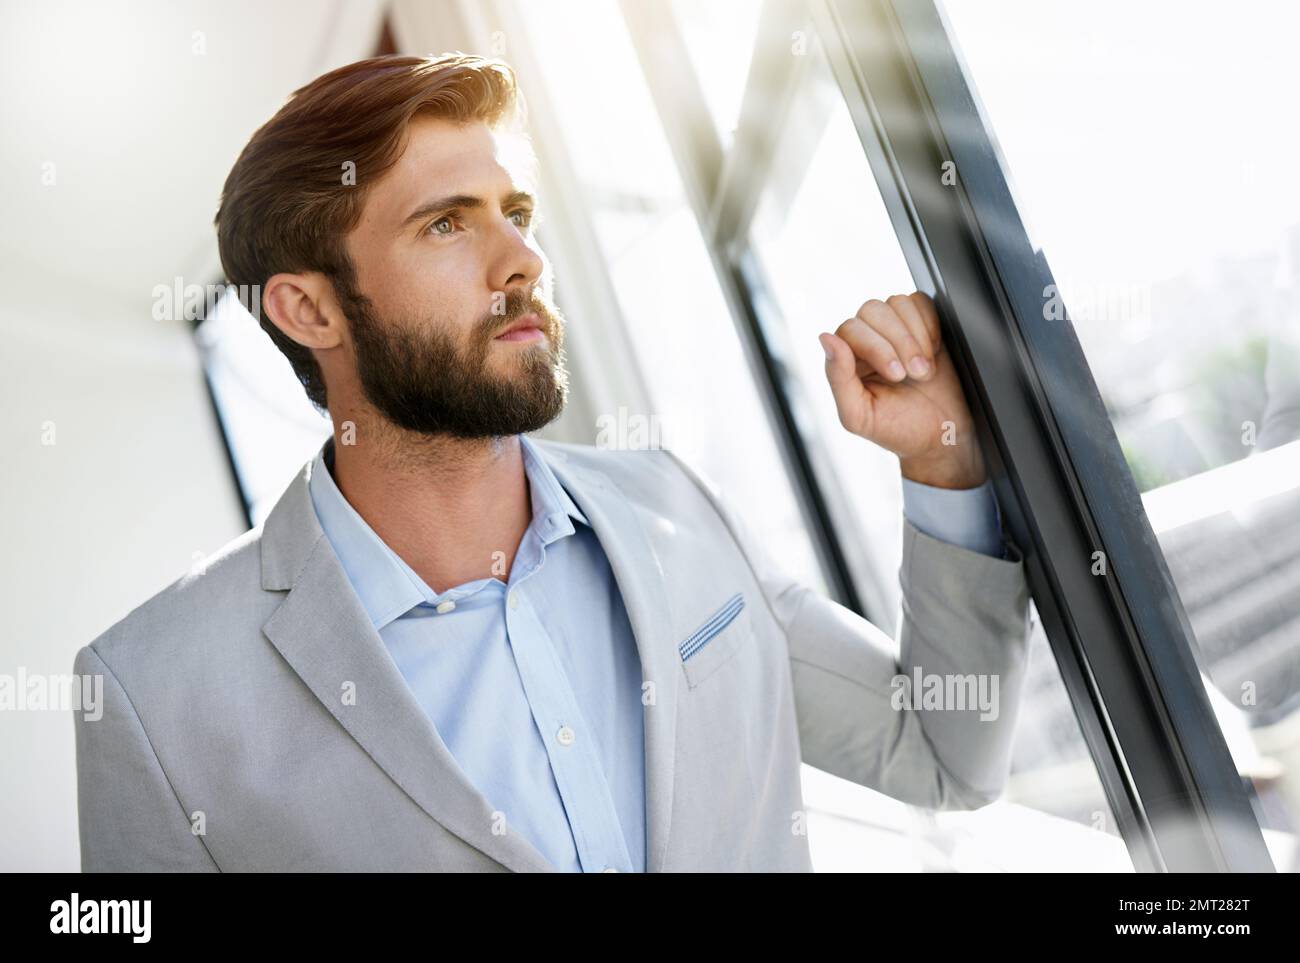 The vision of an ambitious man. an ambitious young businessman looking through his office window. Stock Photo